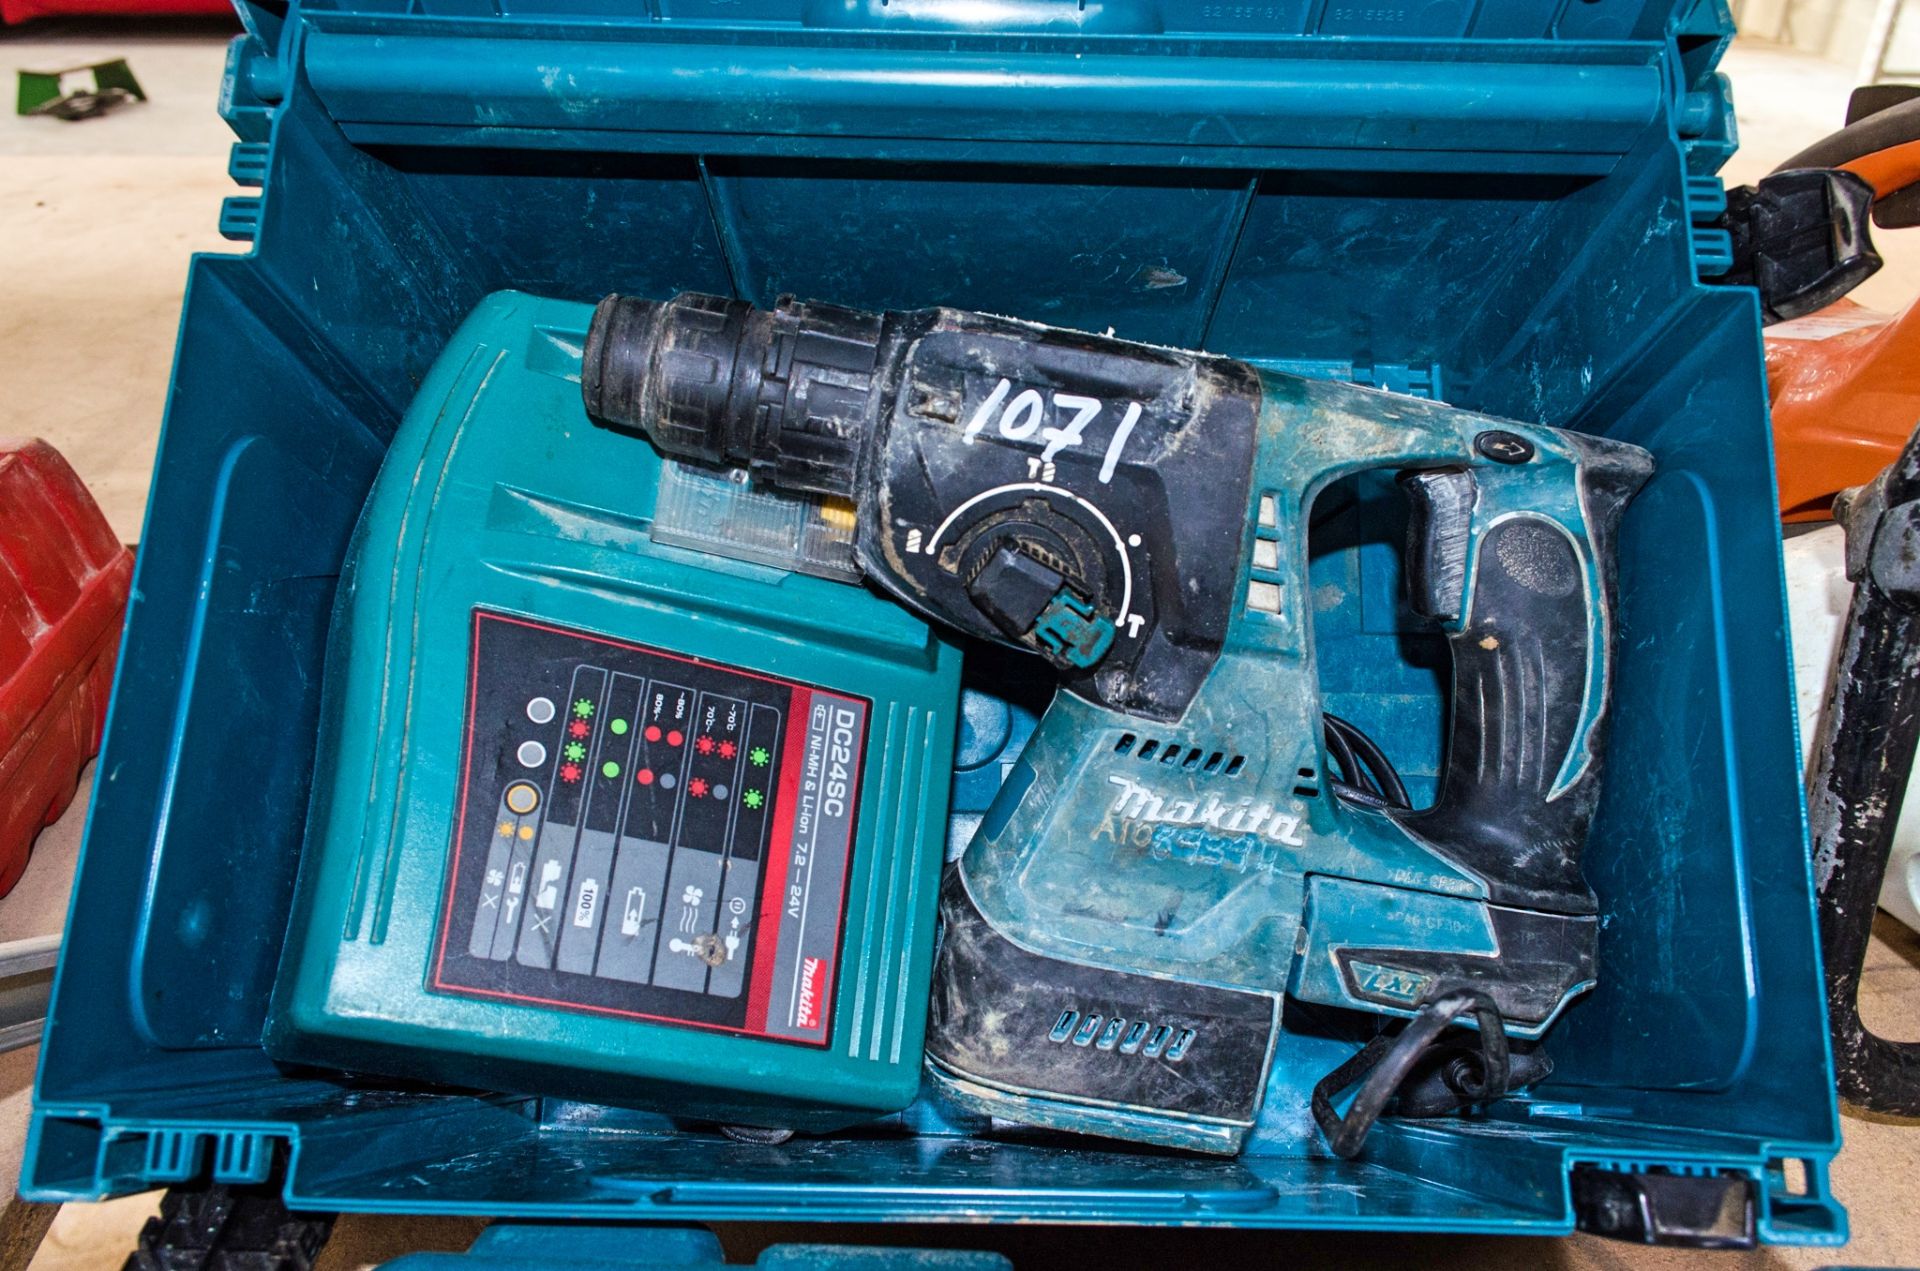 Makita DHR242 18v cordless SDS rotary hammer drill c/w battery, charger and carry case A1089394